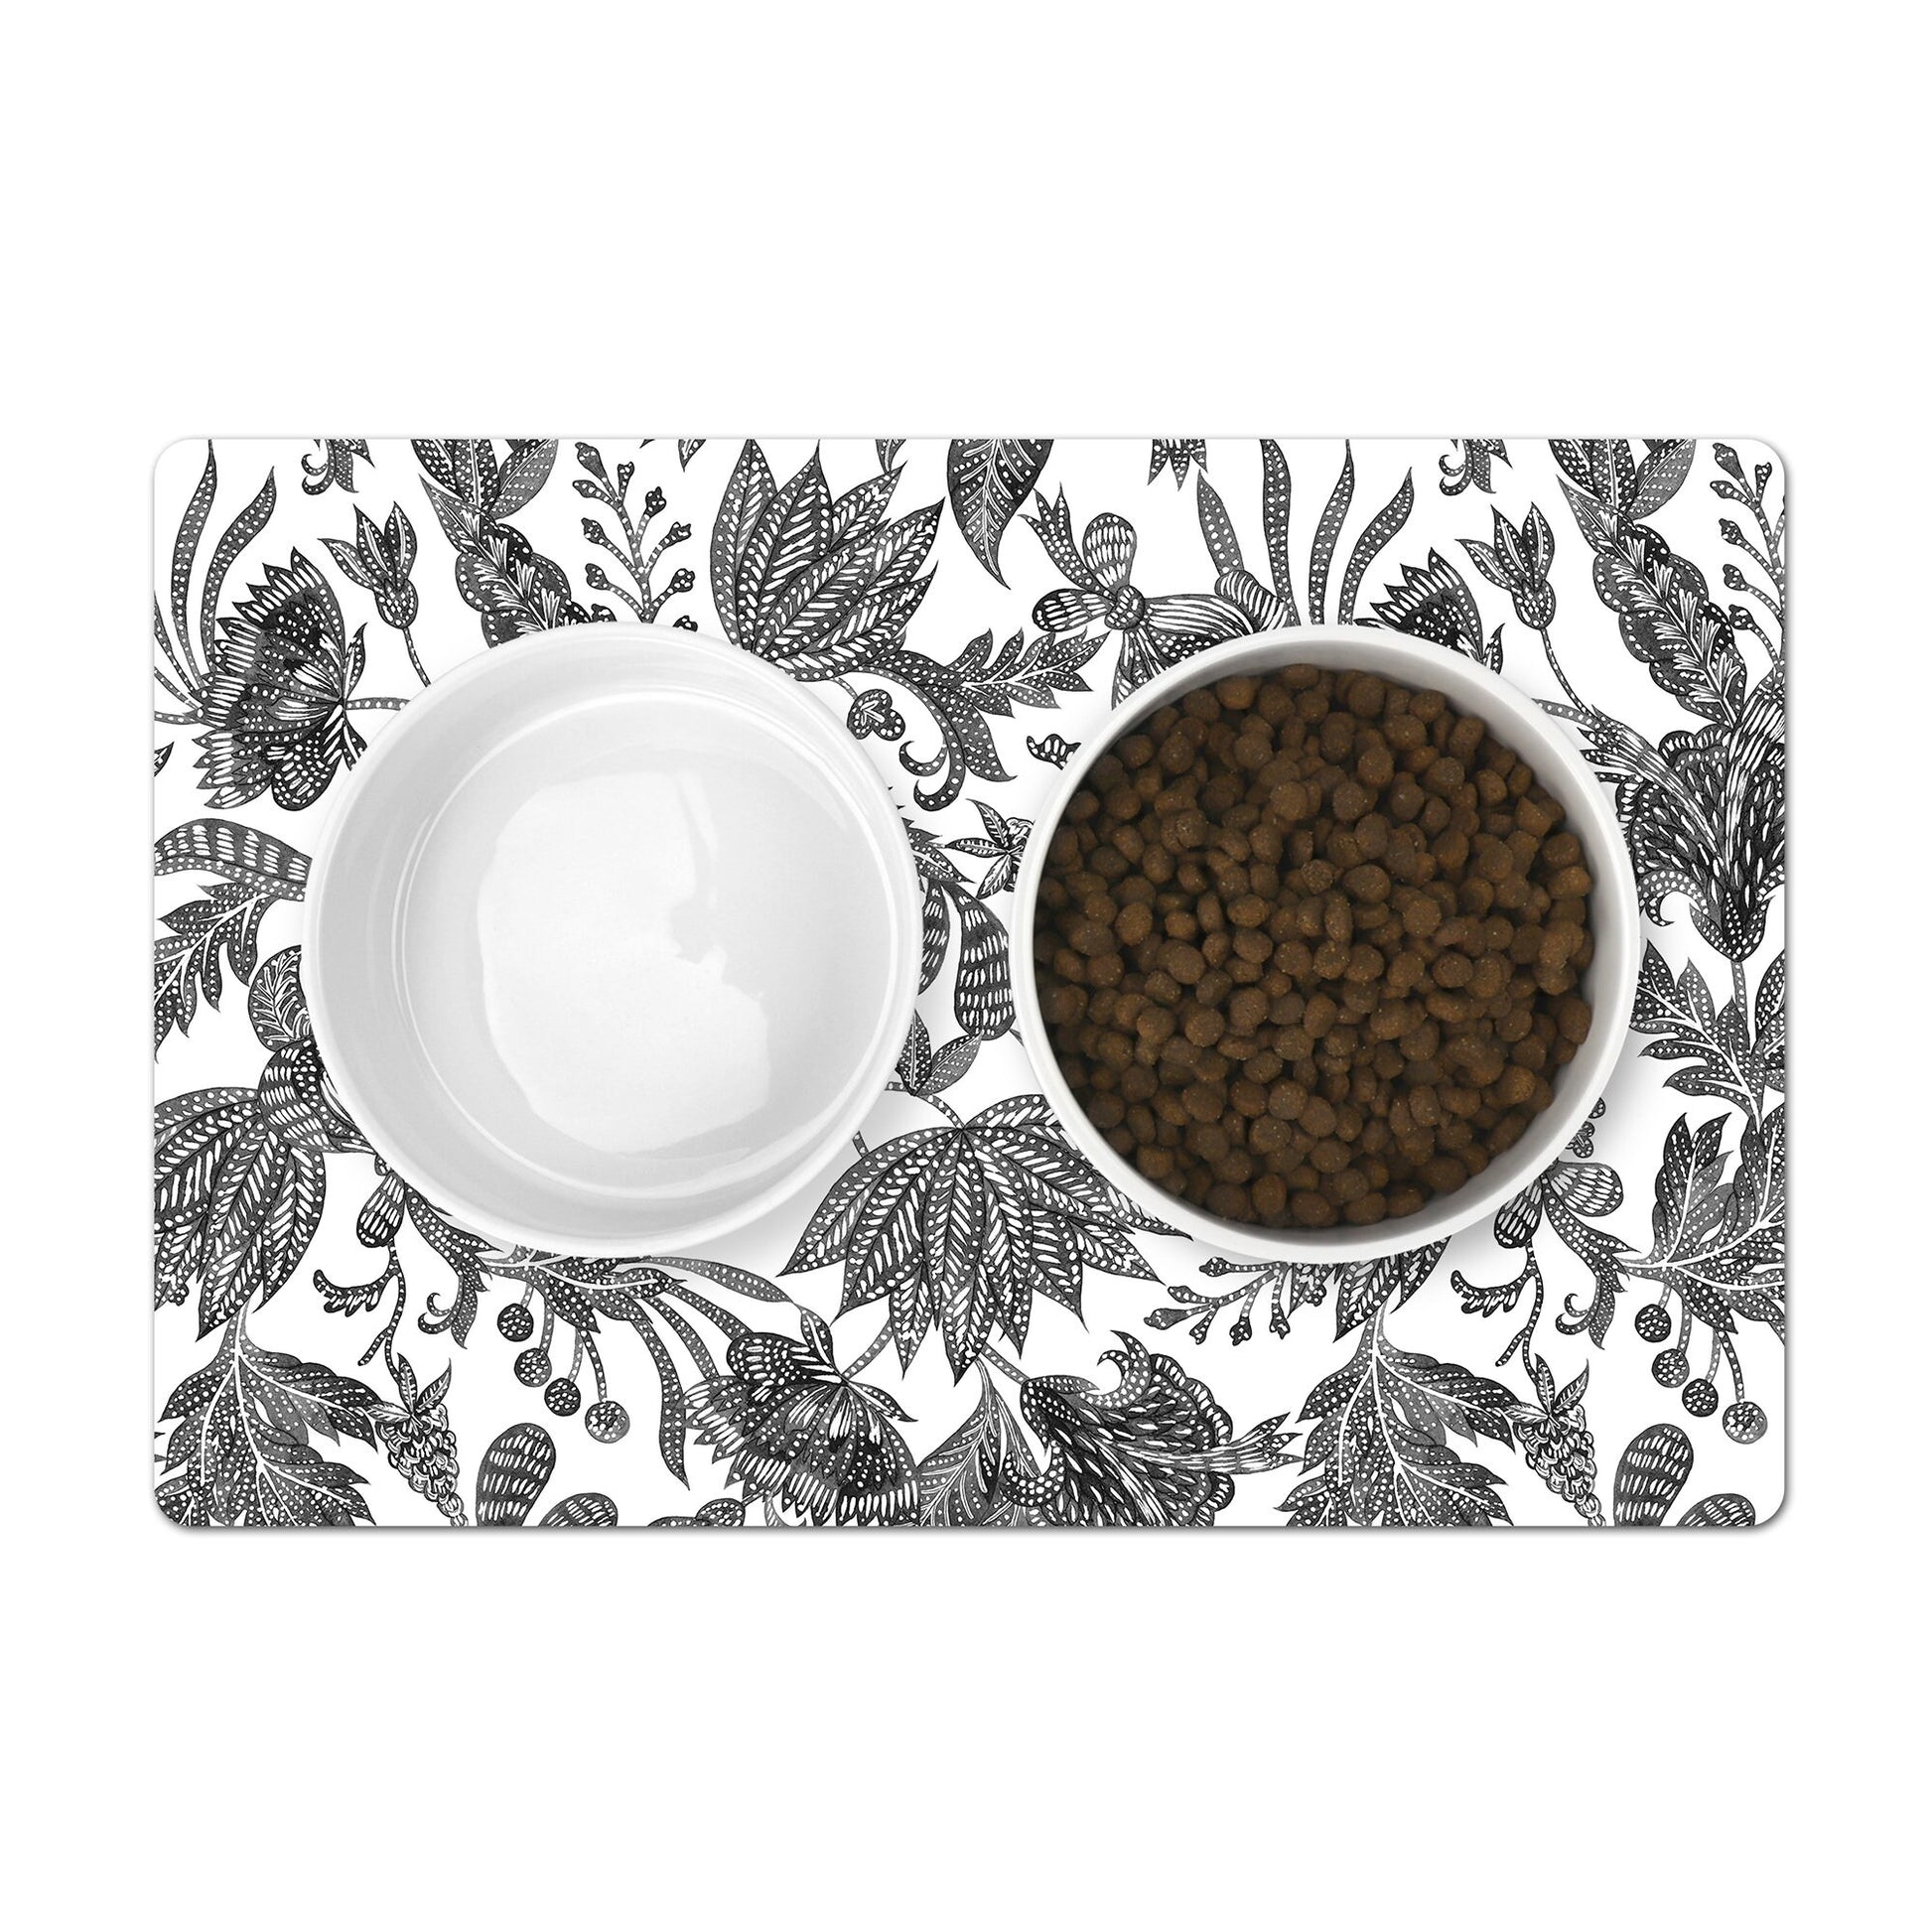 Mat for pet food bowls with a black and white floral batik print.